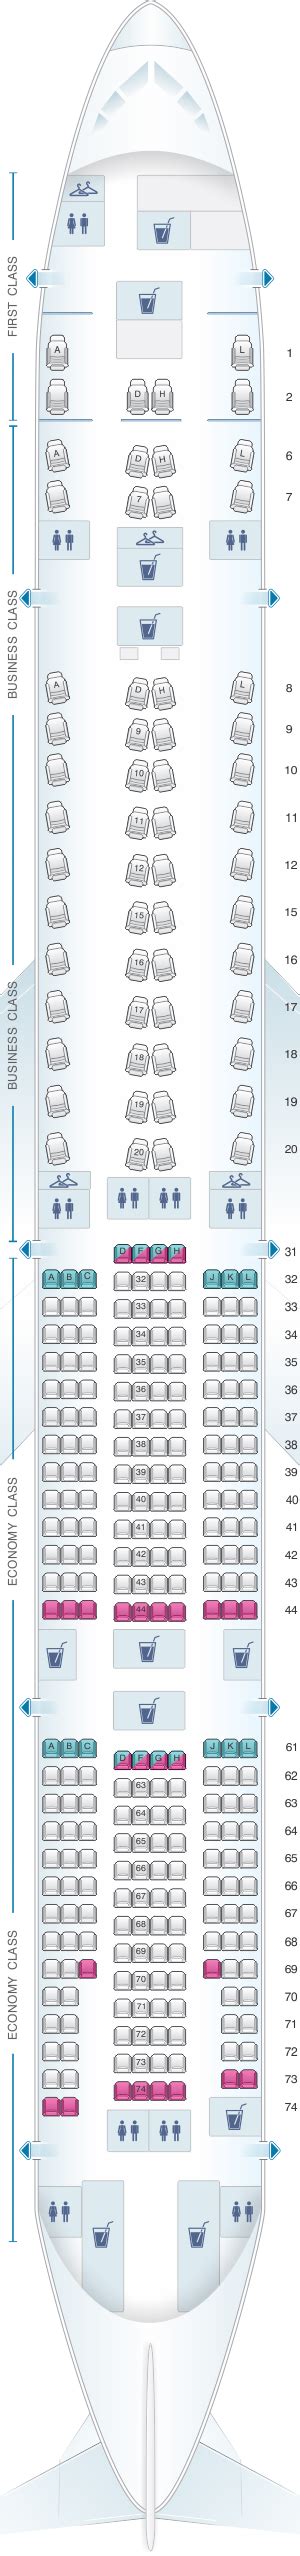 Air China Boeing 777 Jet Seating Chart Elcho Table